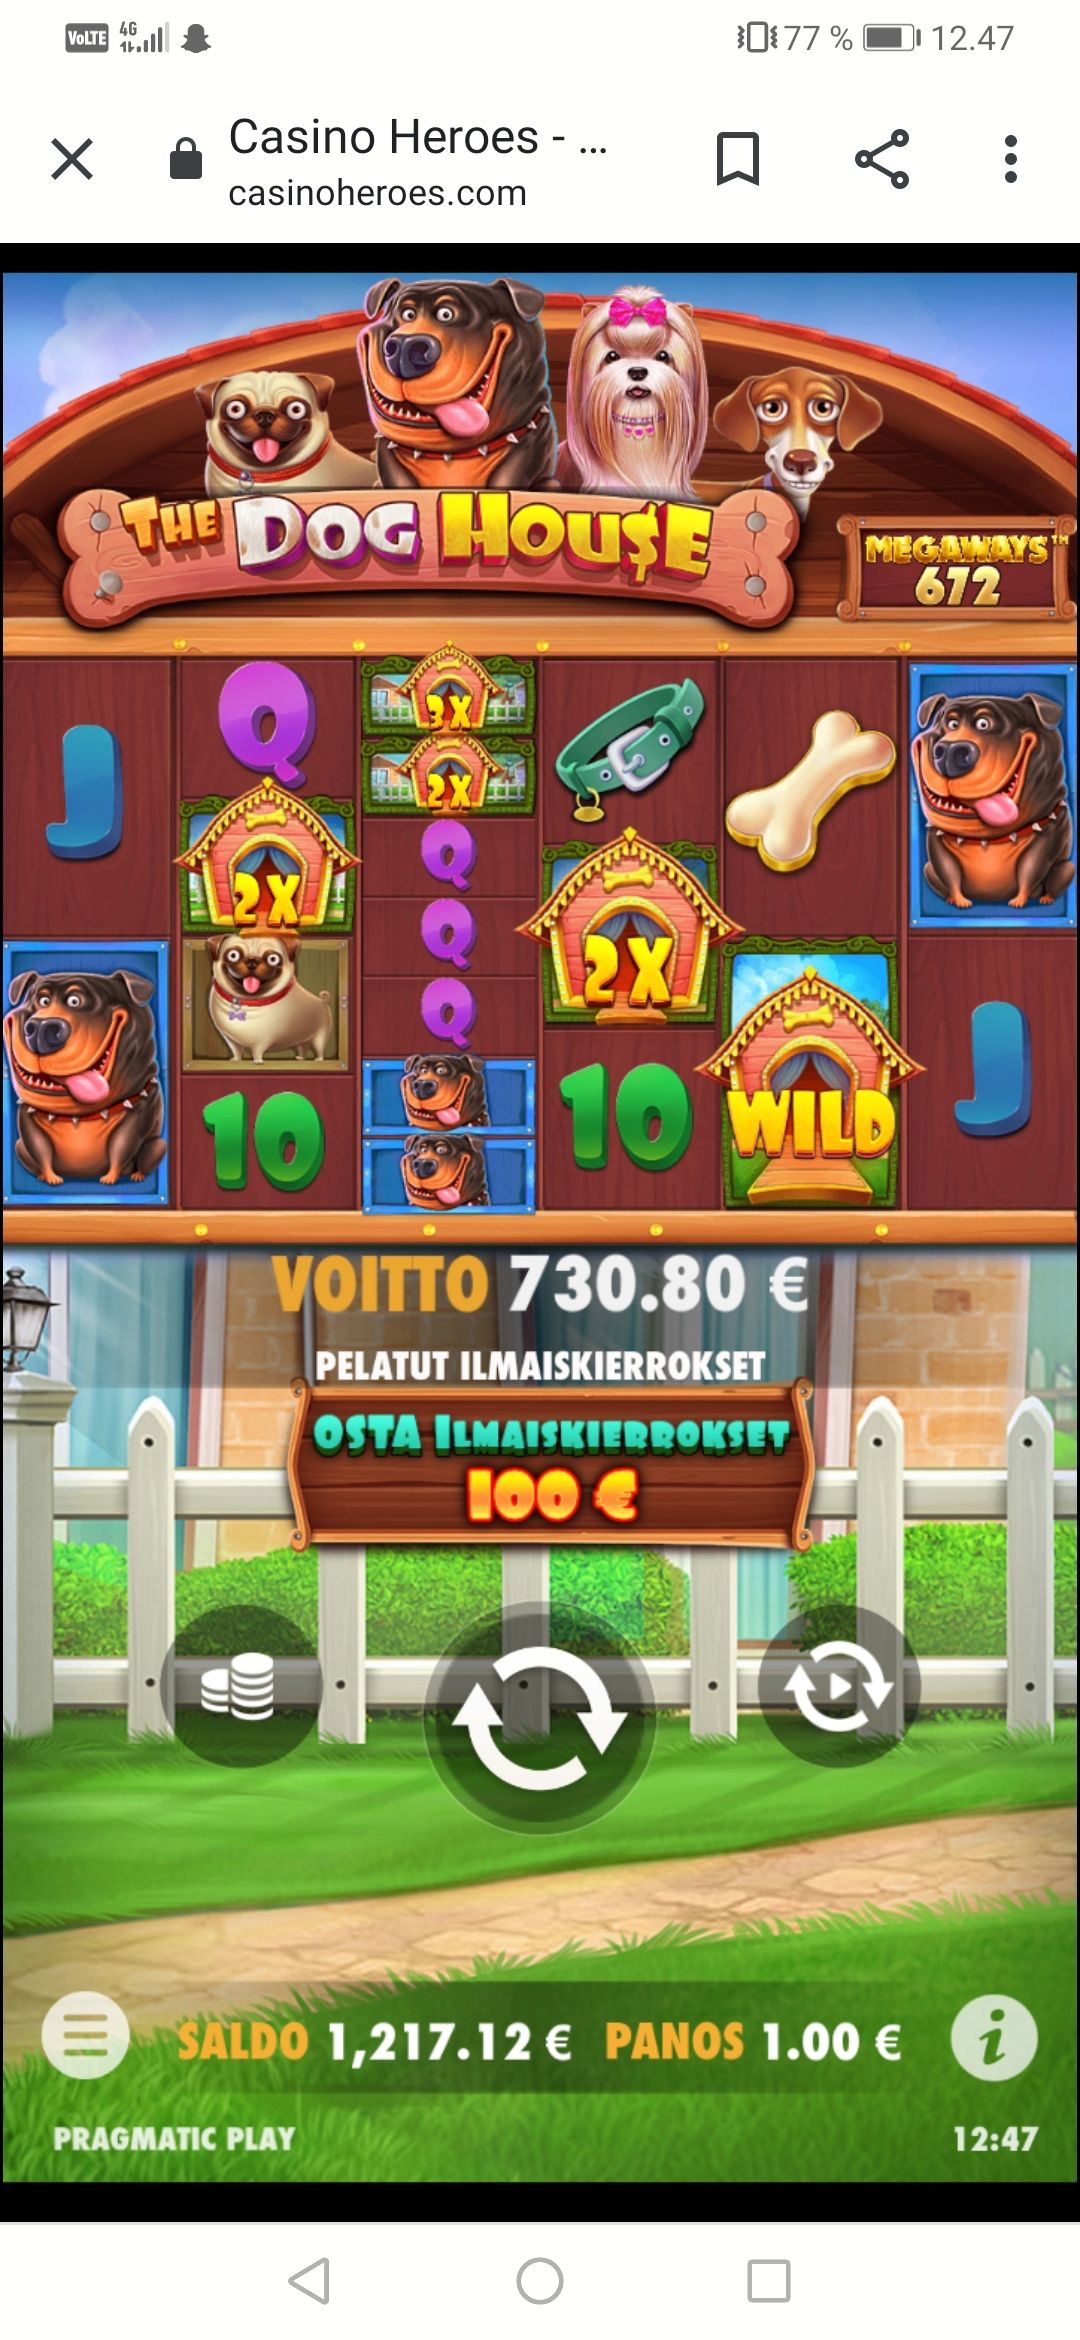 Casino Heroes undefined iso voitto